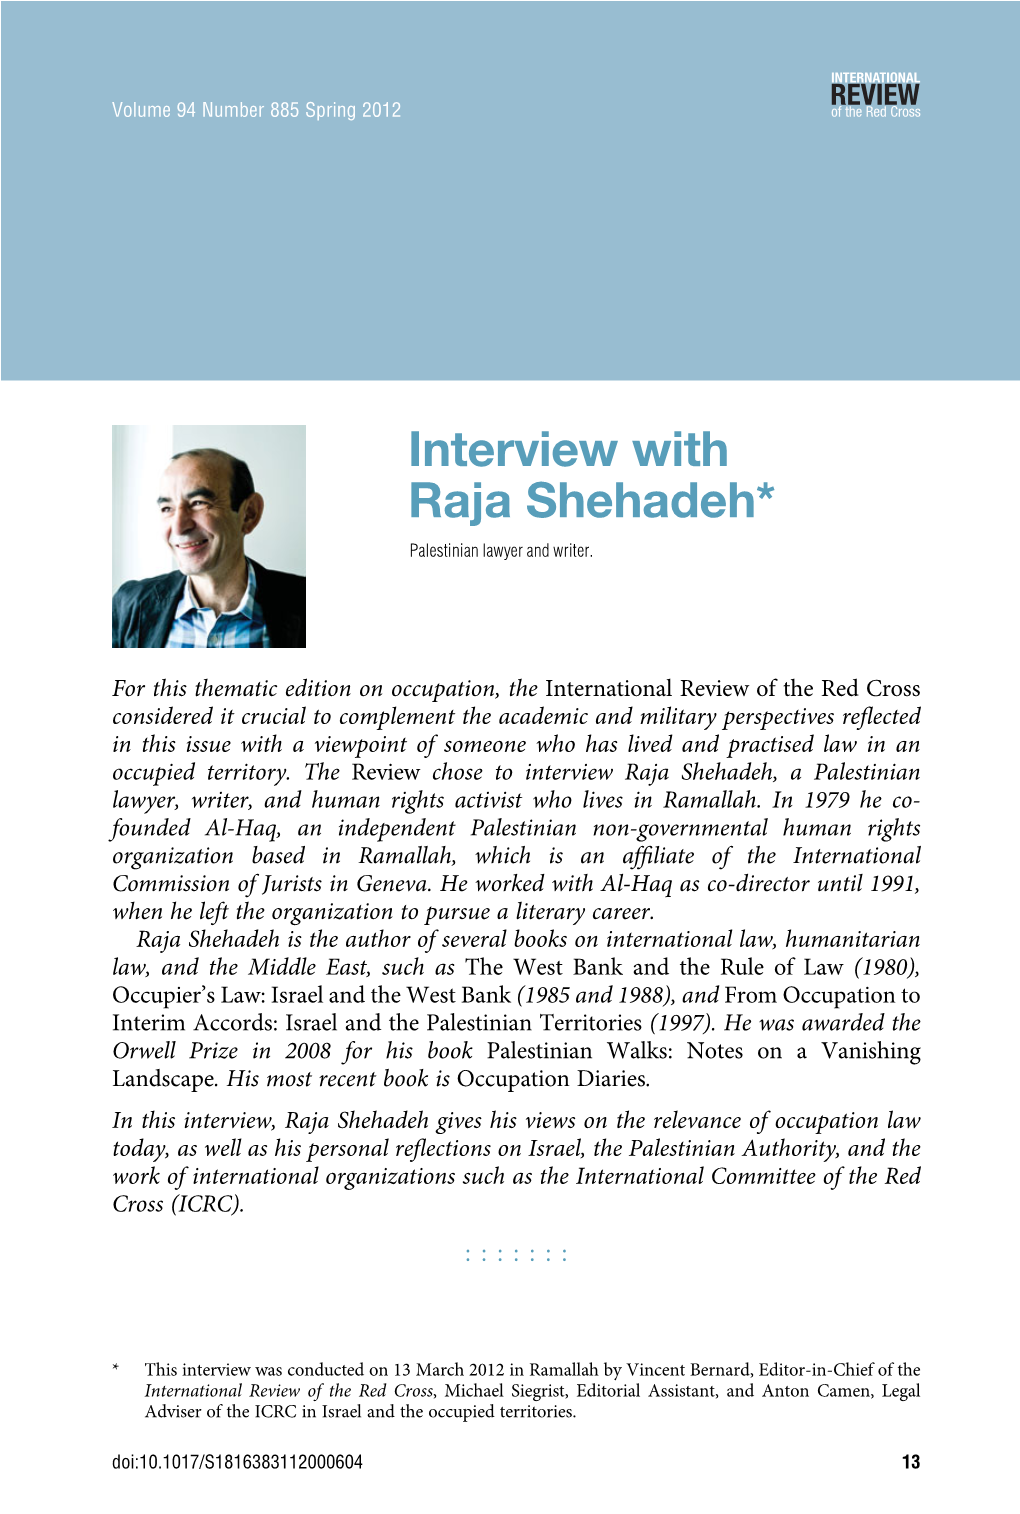 Interview with Raja Shehadeh*